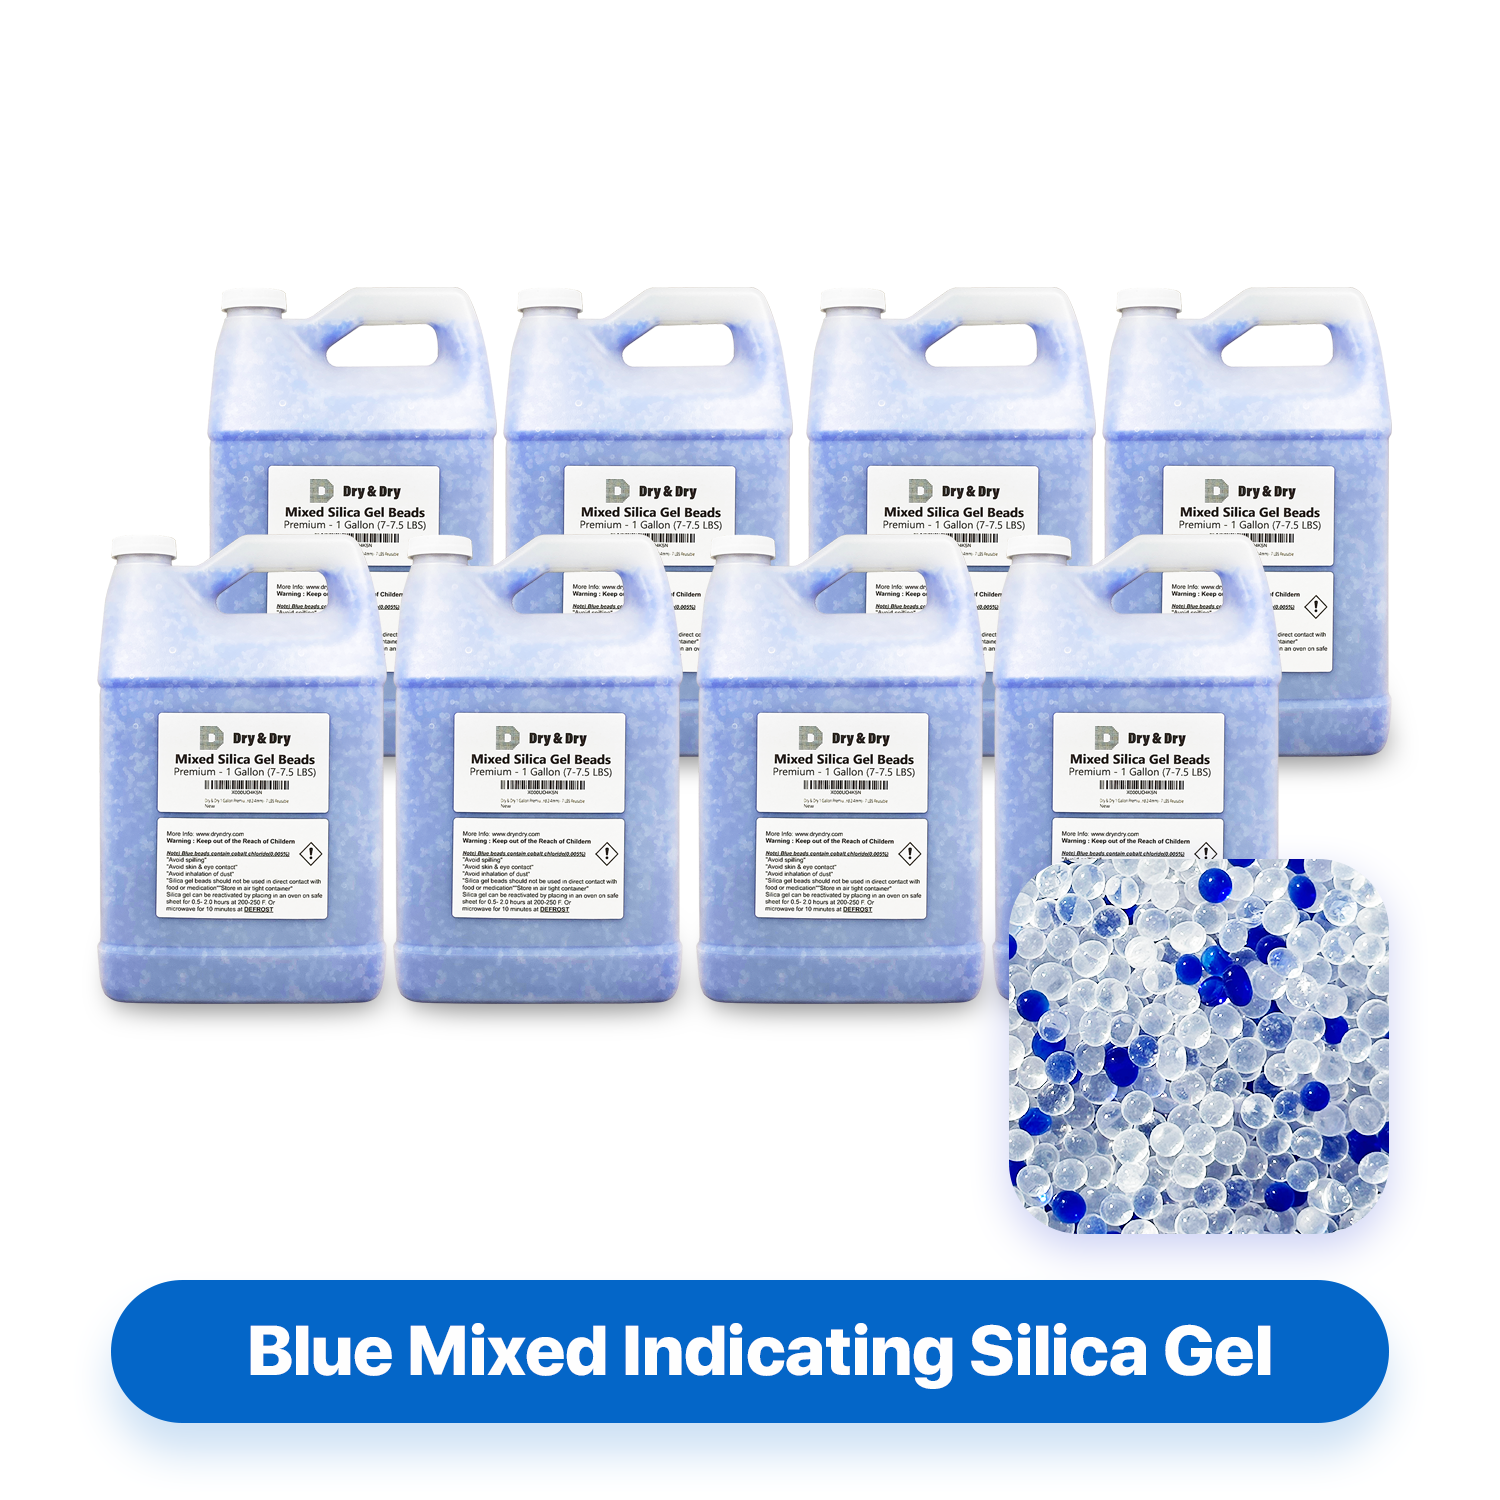 8 Gallon (56-60 LBS) "Dry & Dry" High Quality Mixed Silica Gel Desiccant Beads - Rechargeable